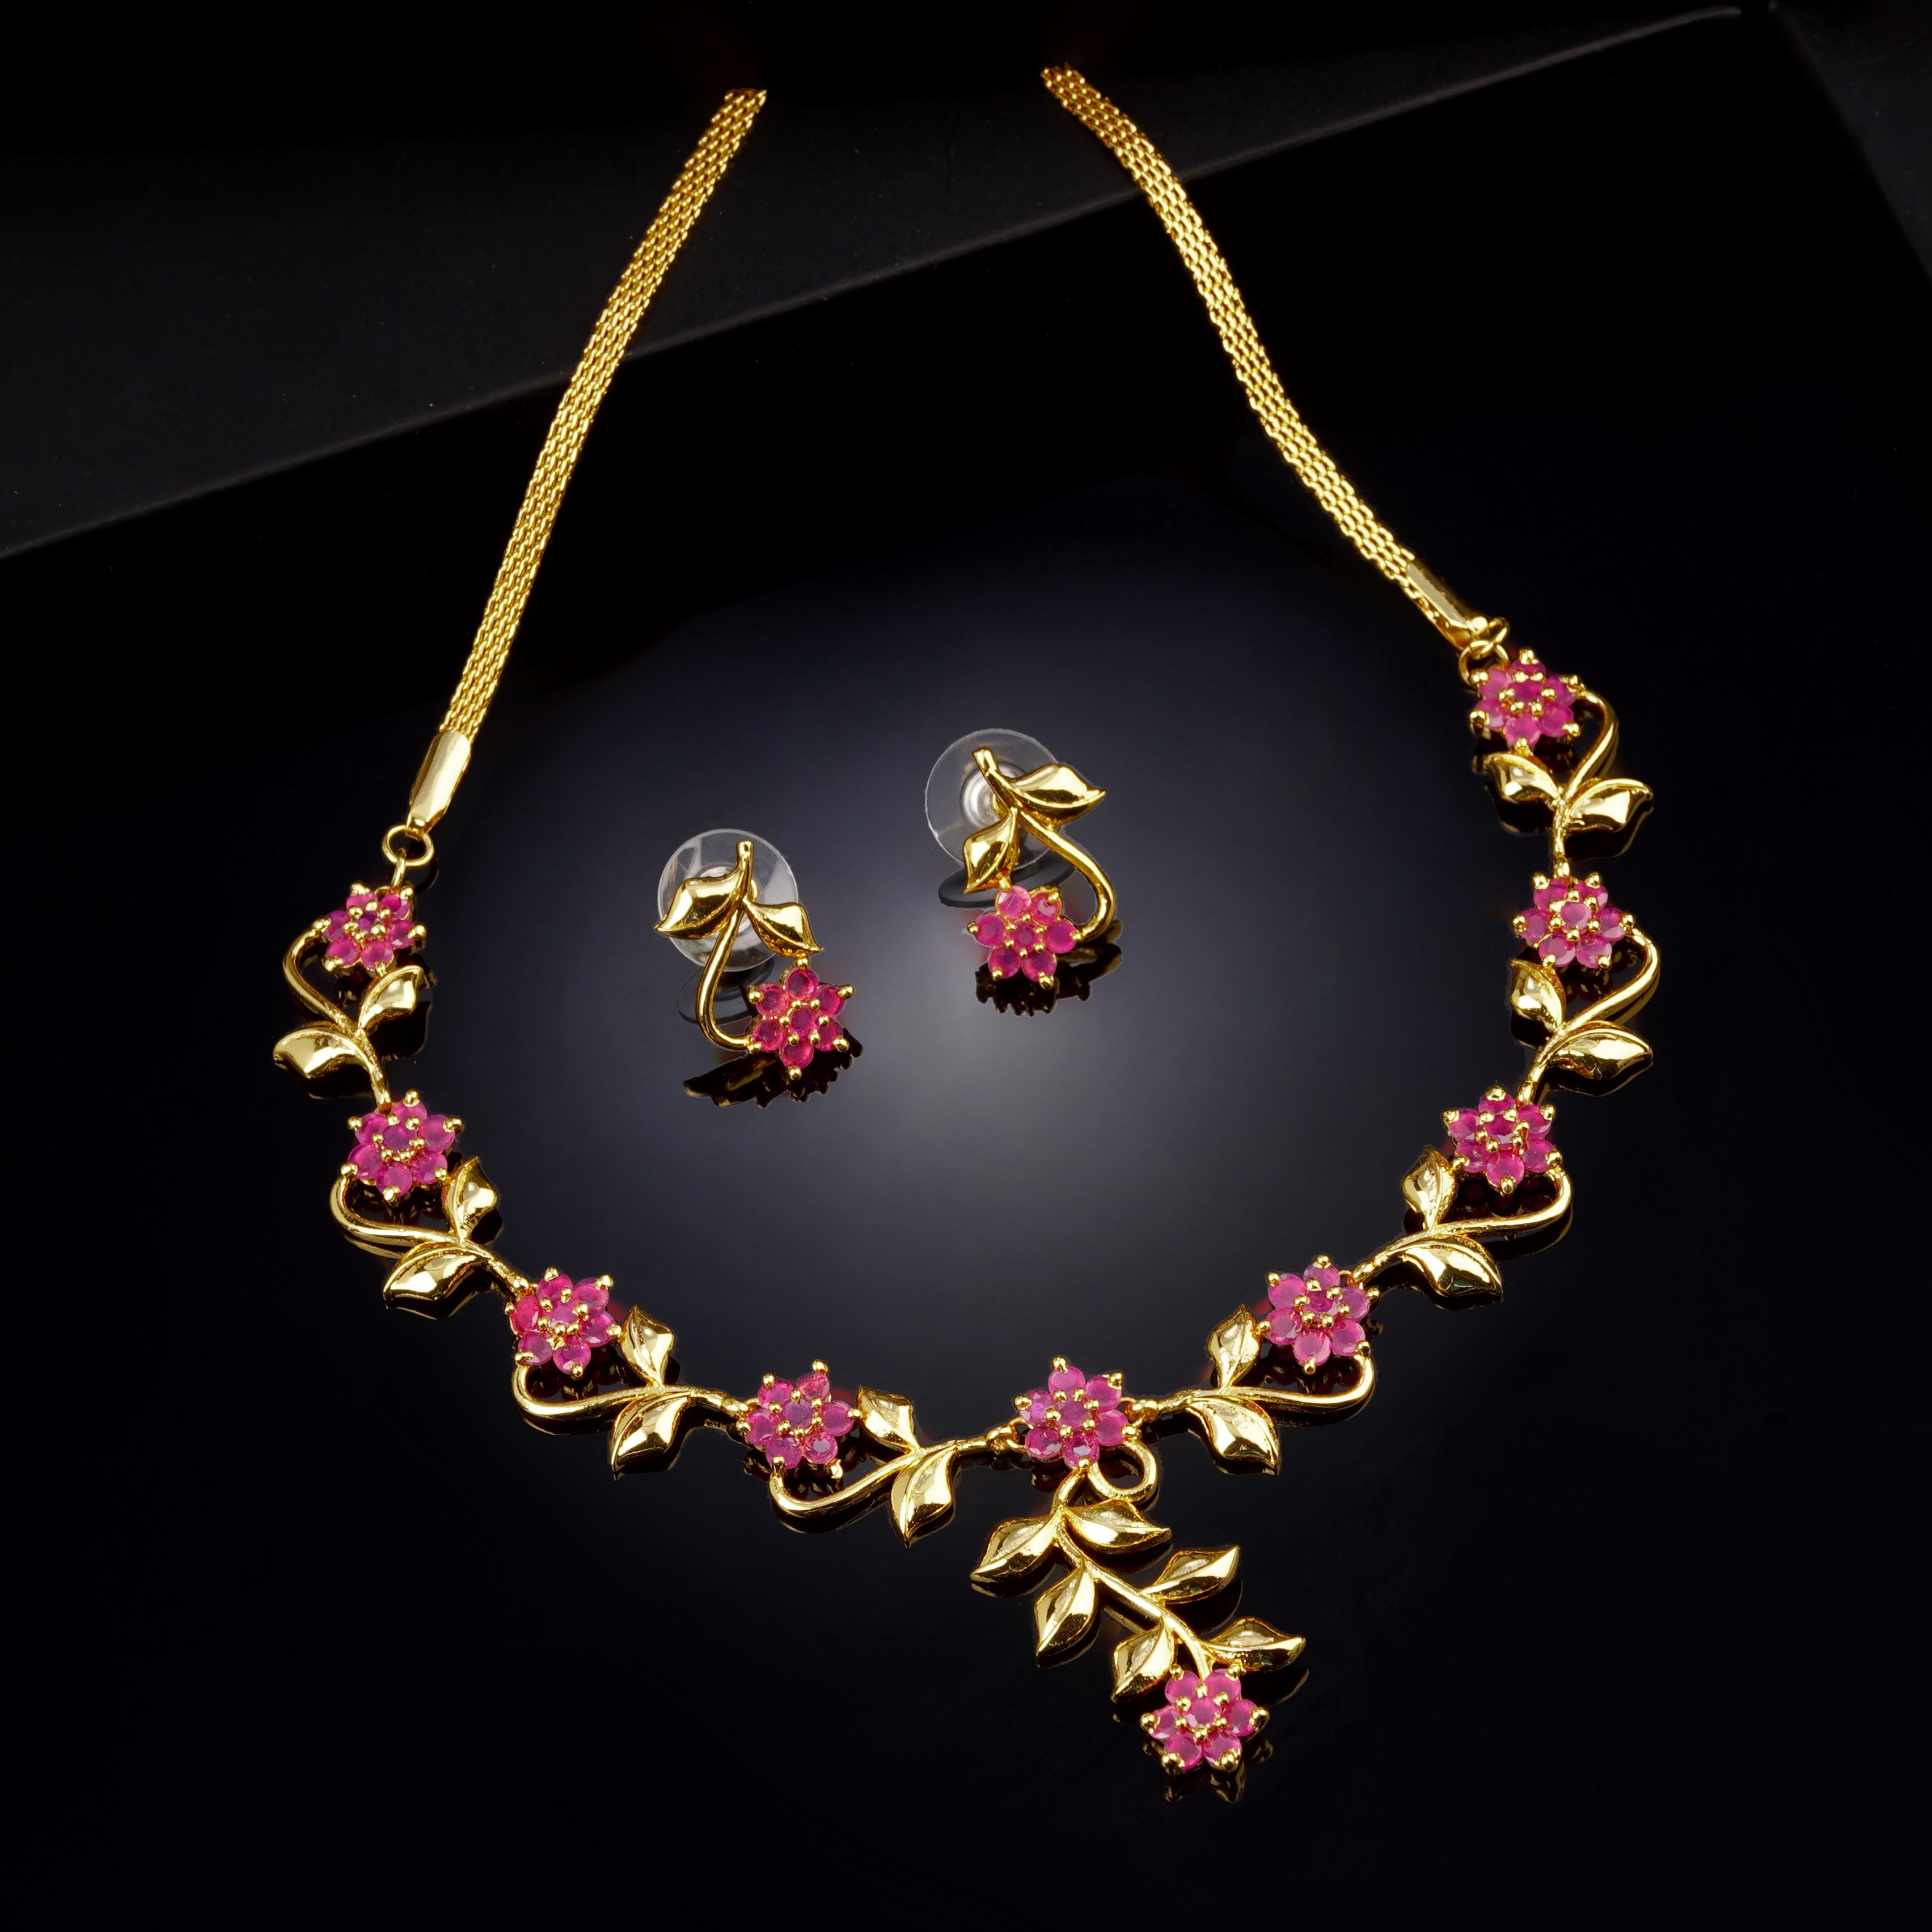 Estele Gold Plated CZ Flower Shaped Necklace Set with Pink Stones for Women 